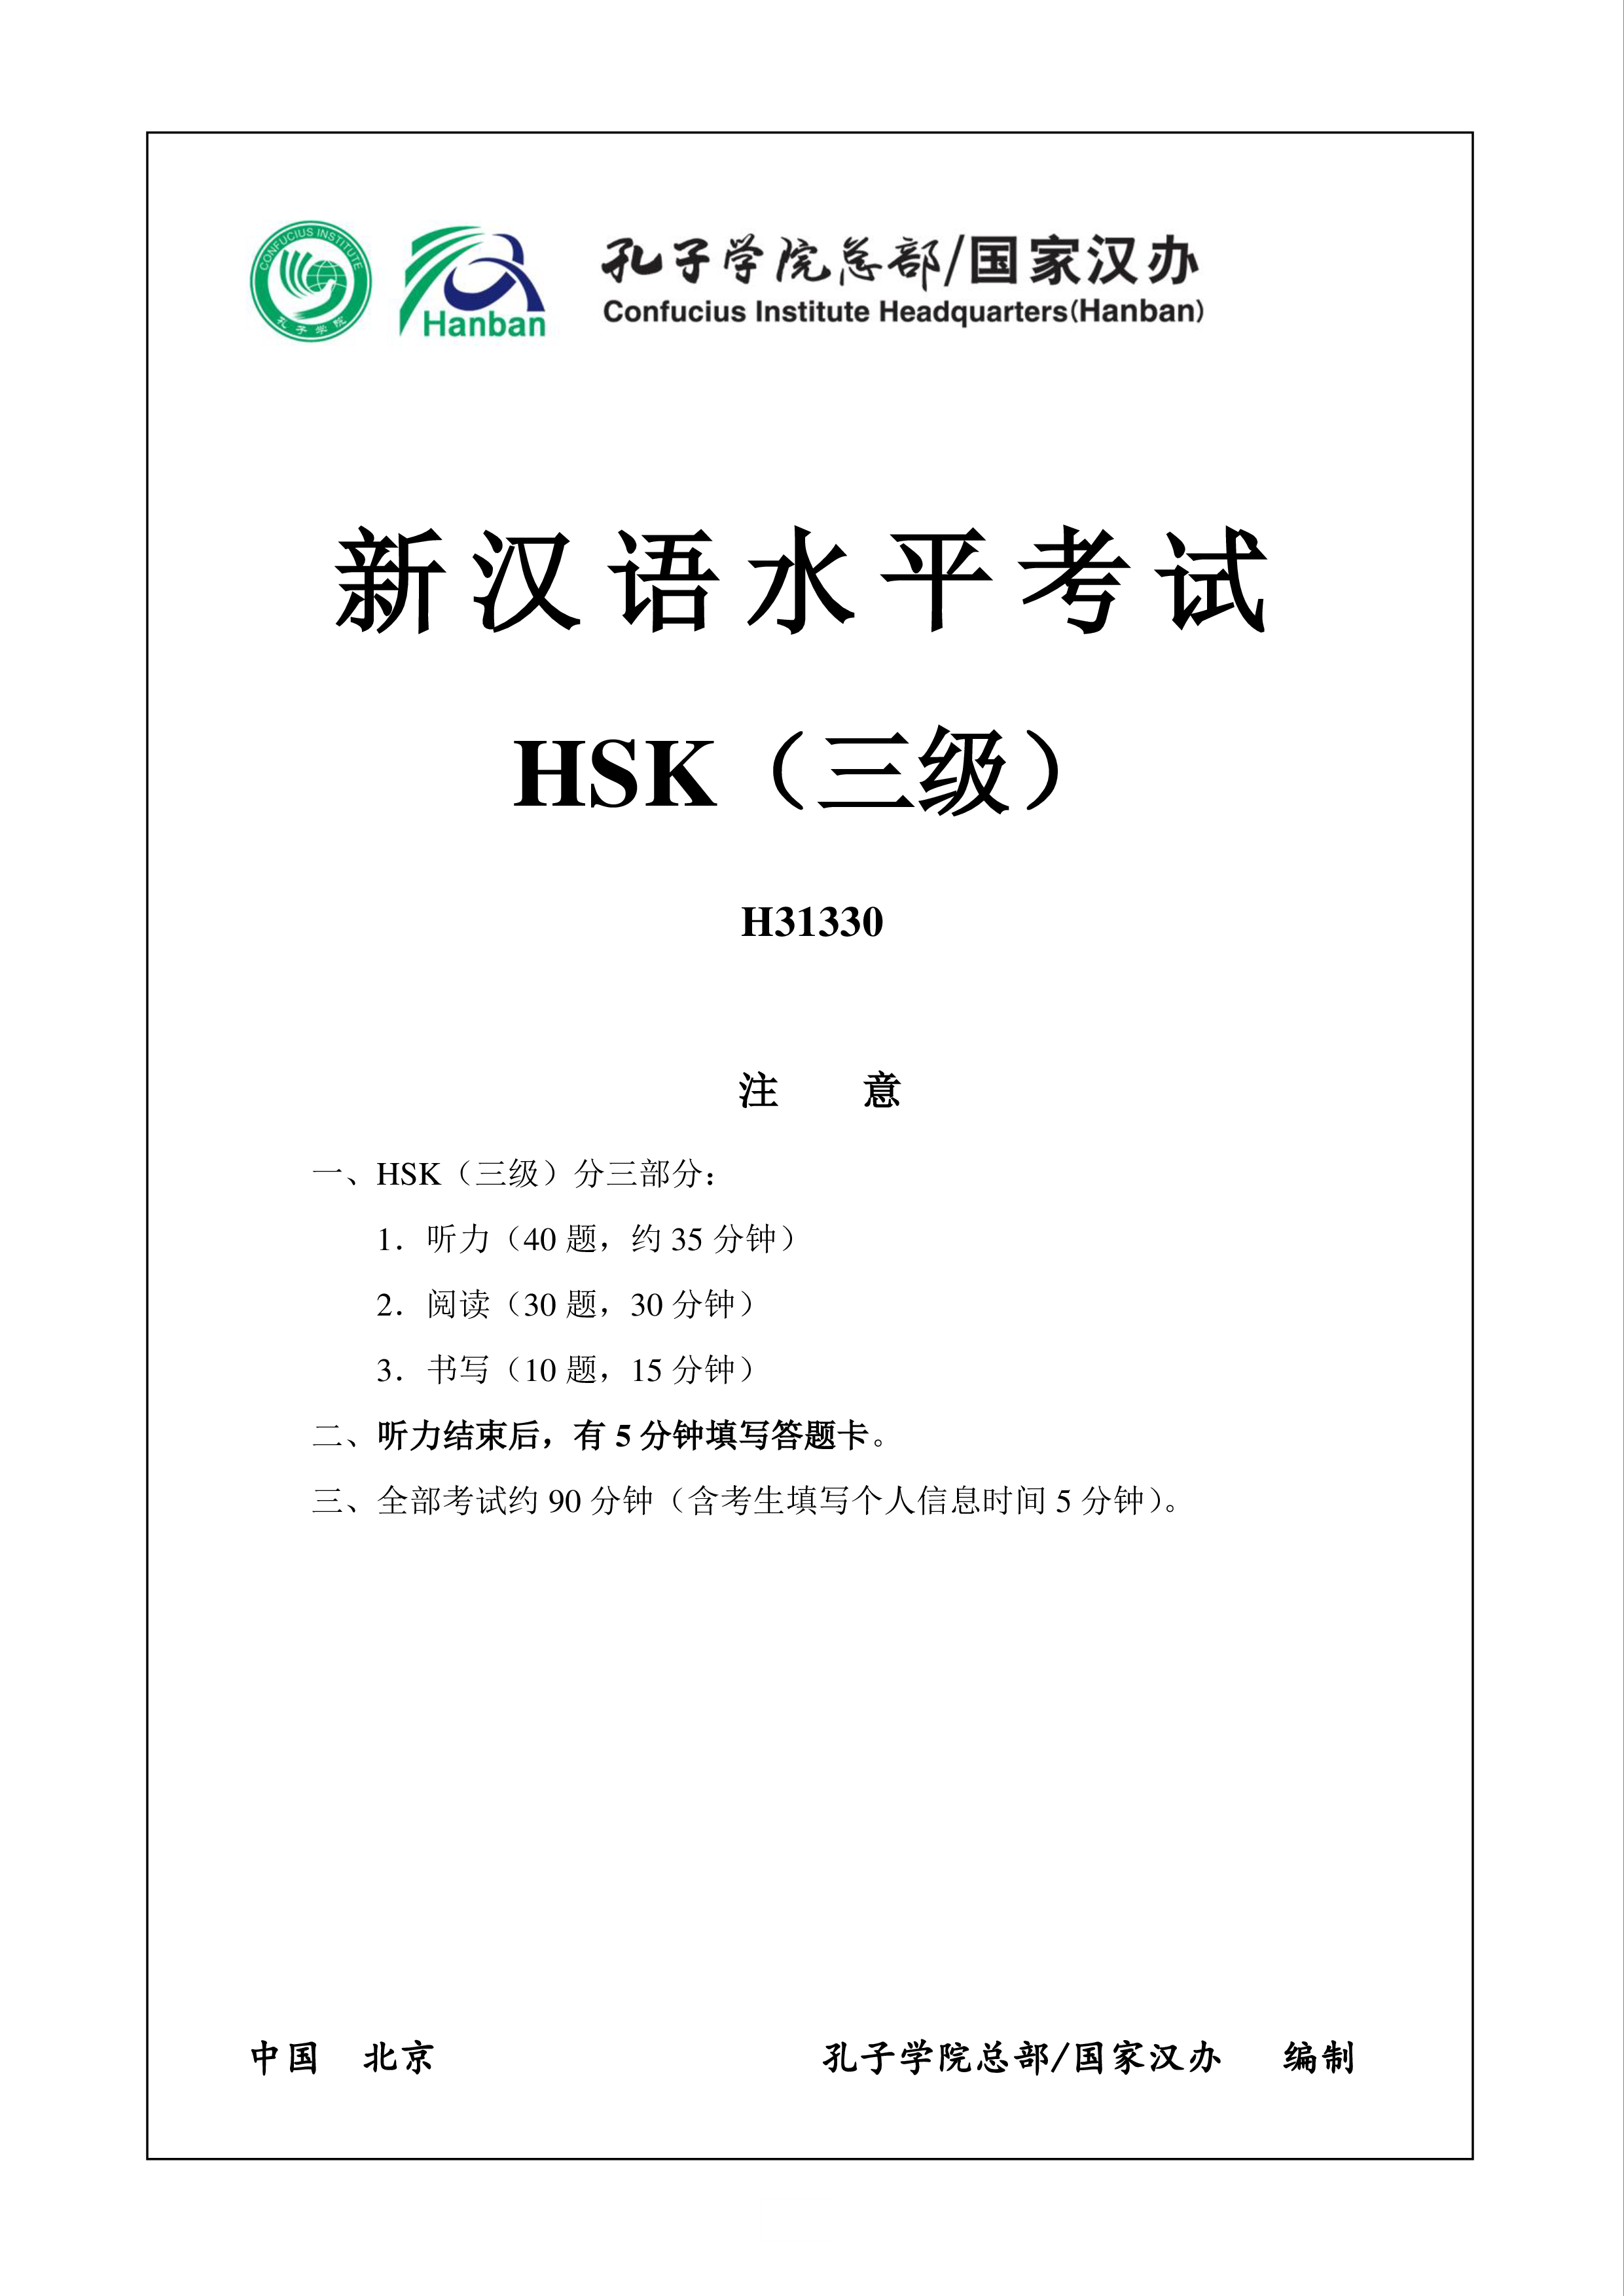 hsk3 chinese exam including answers # hsk3 h31330 plantilla imagen principal